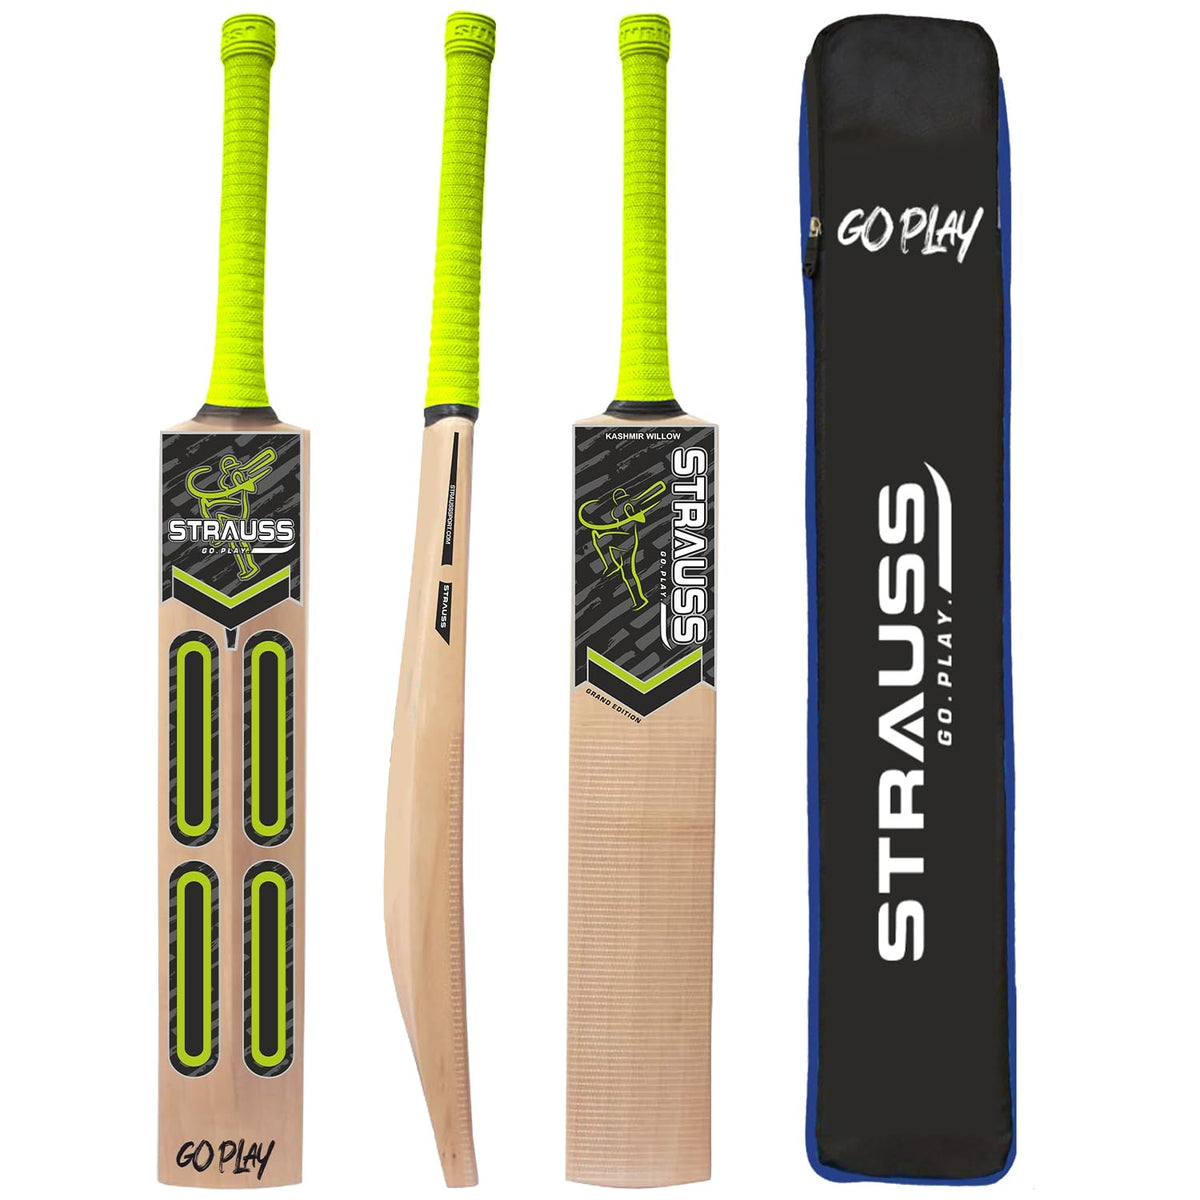 STRAUSS Grand Edition Kashmir Willow Scoop Cricket Bat |Size: Short Hand| Green |Suitable for Tennis Ball |Ideal for Boys/Youth/Adults (900-1050 Grams)